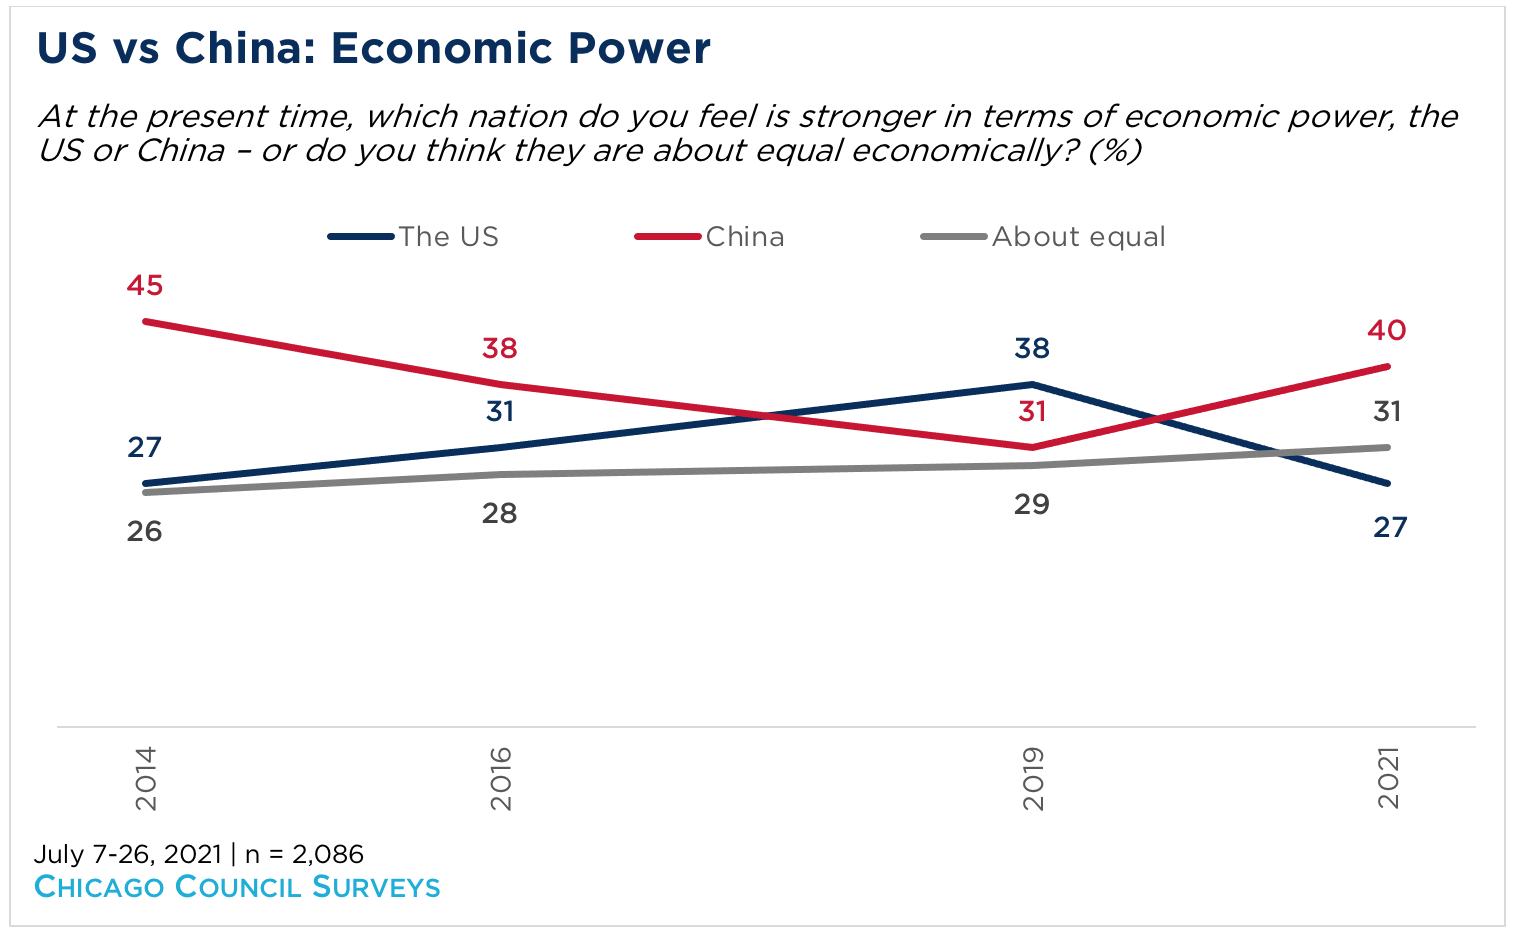 Line graph showing opinion of US vs China as an economic power